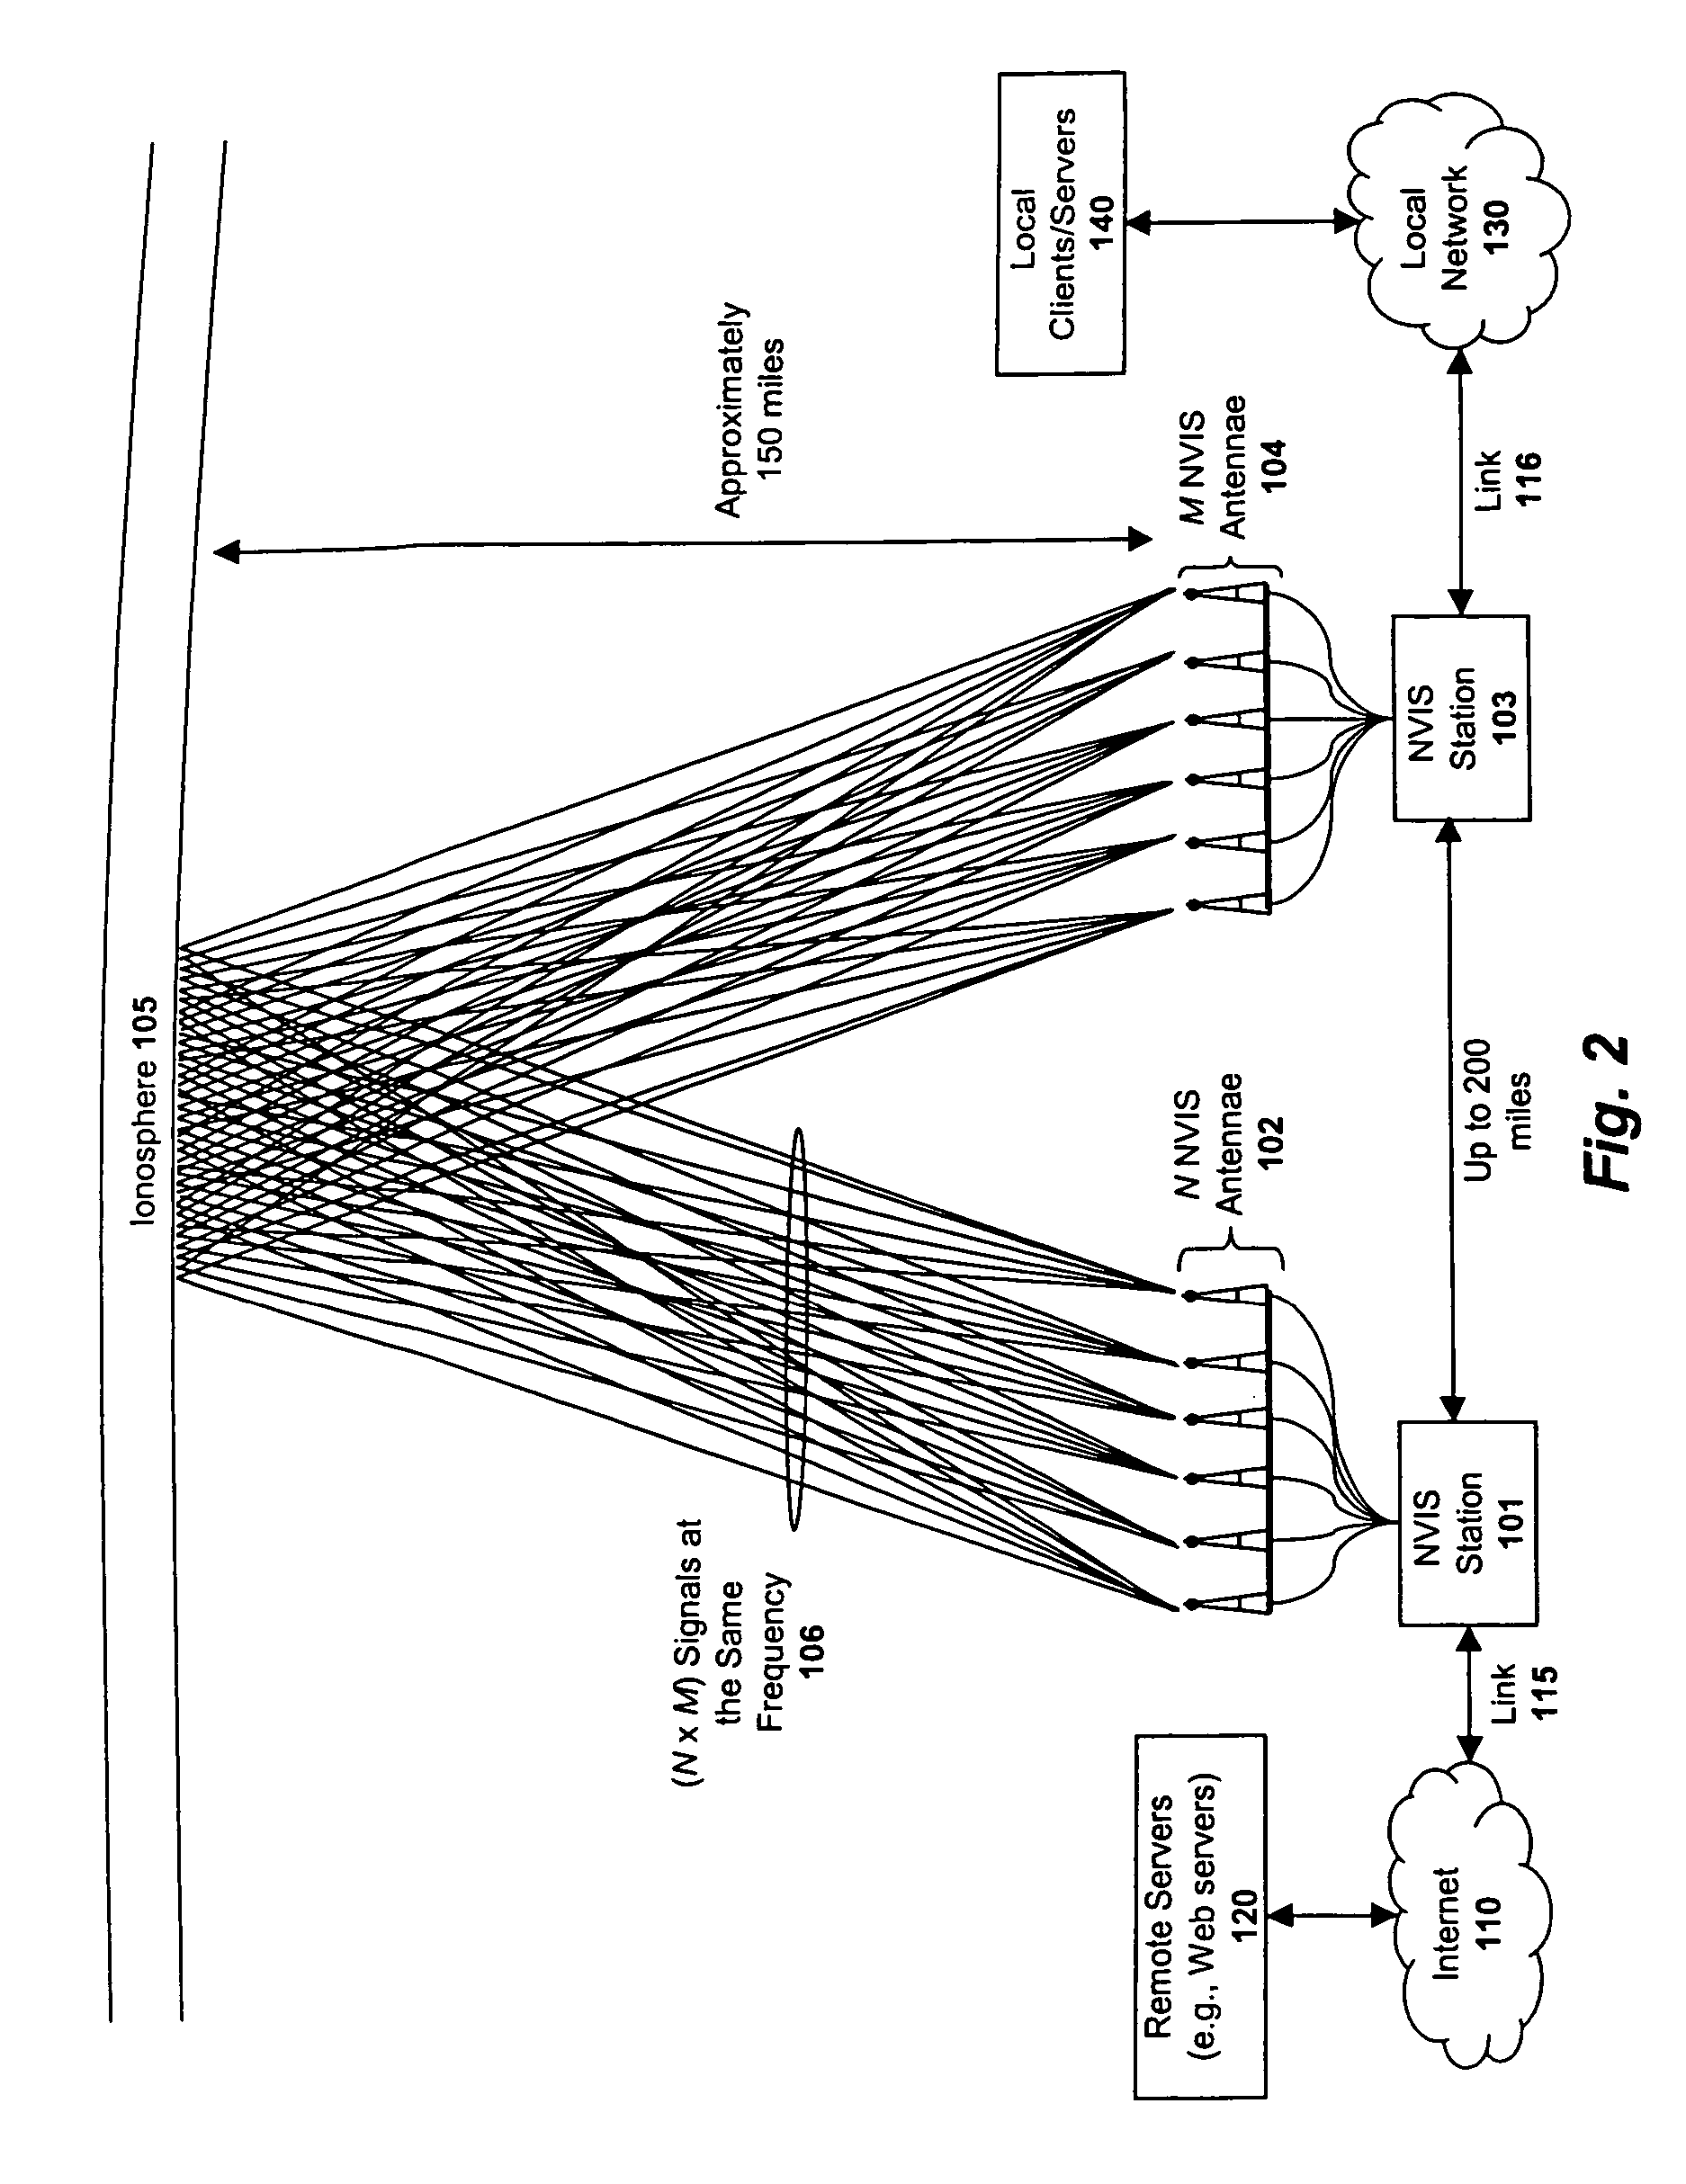 System and method for enhancing near vertical incidence skywave (“NVIS”) communication using space-time coding